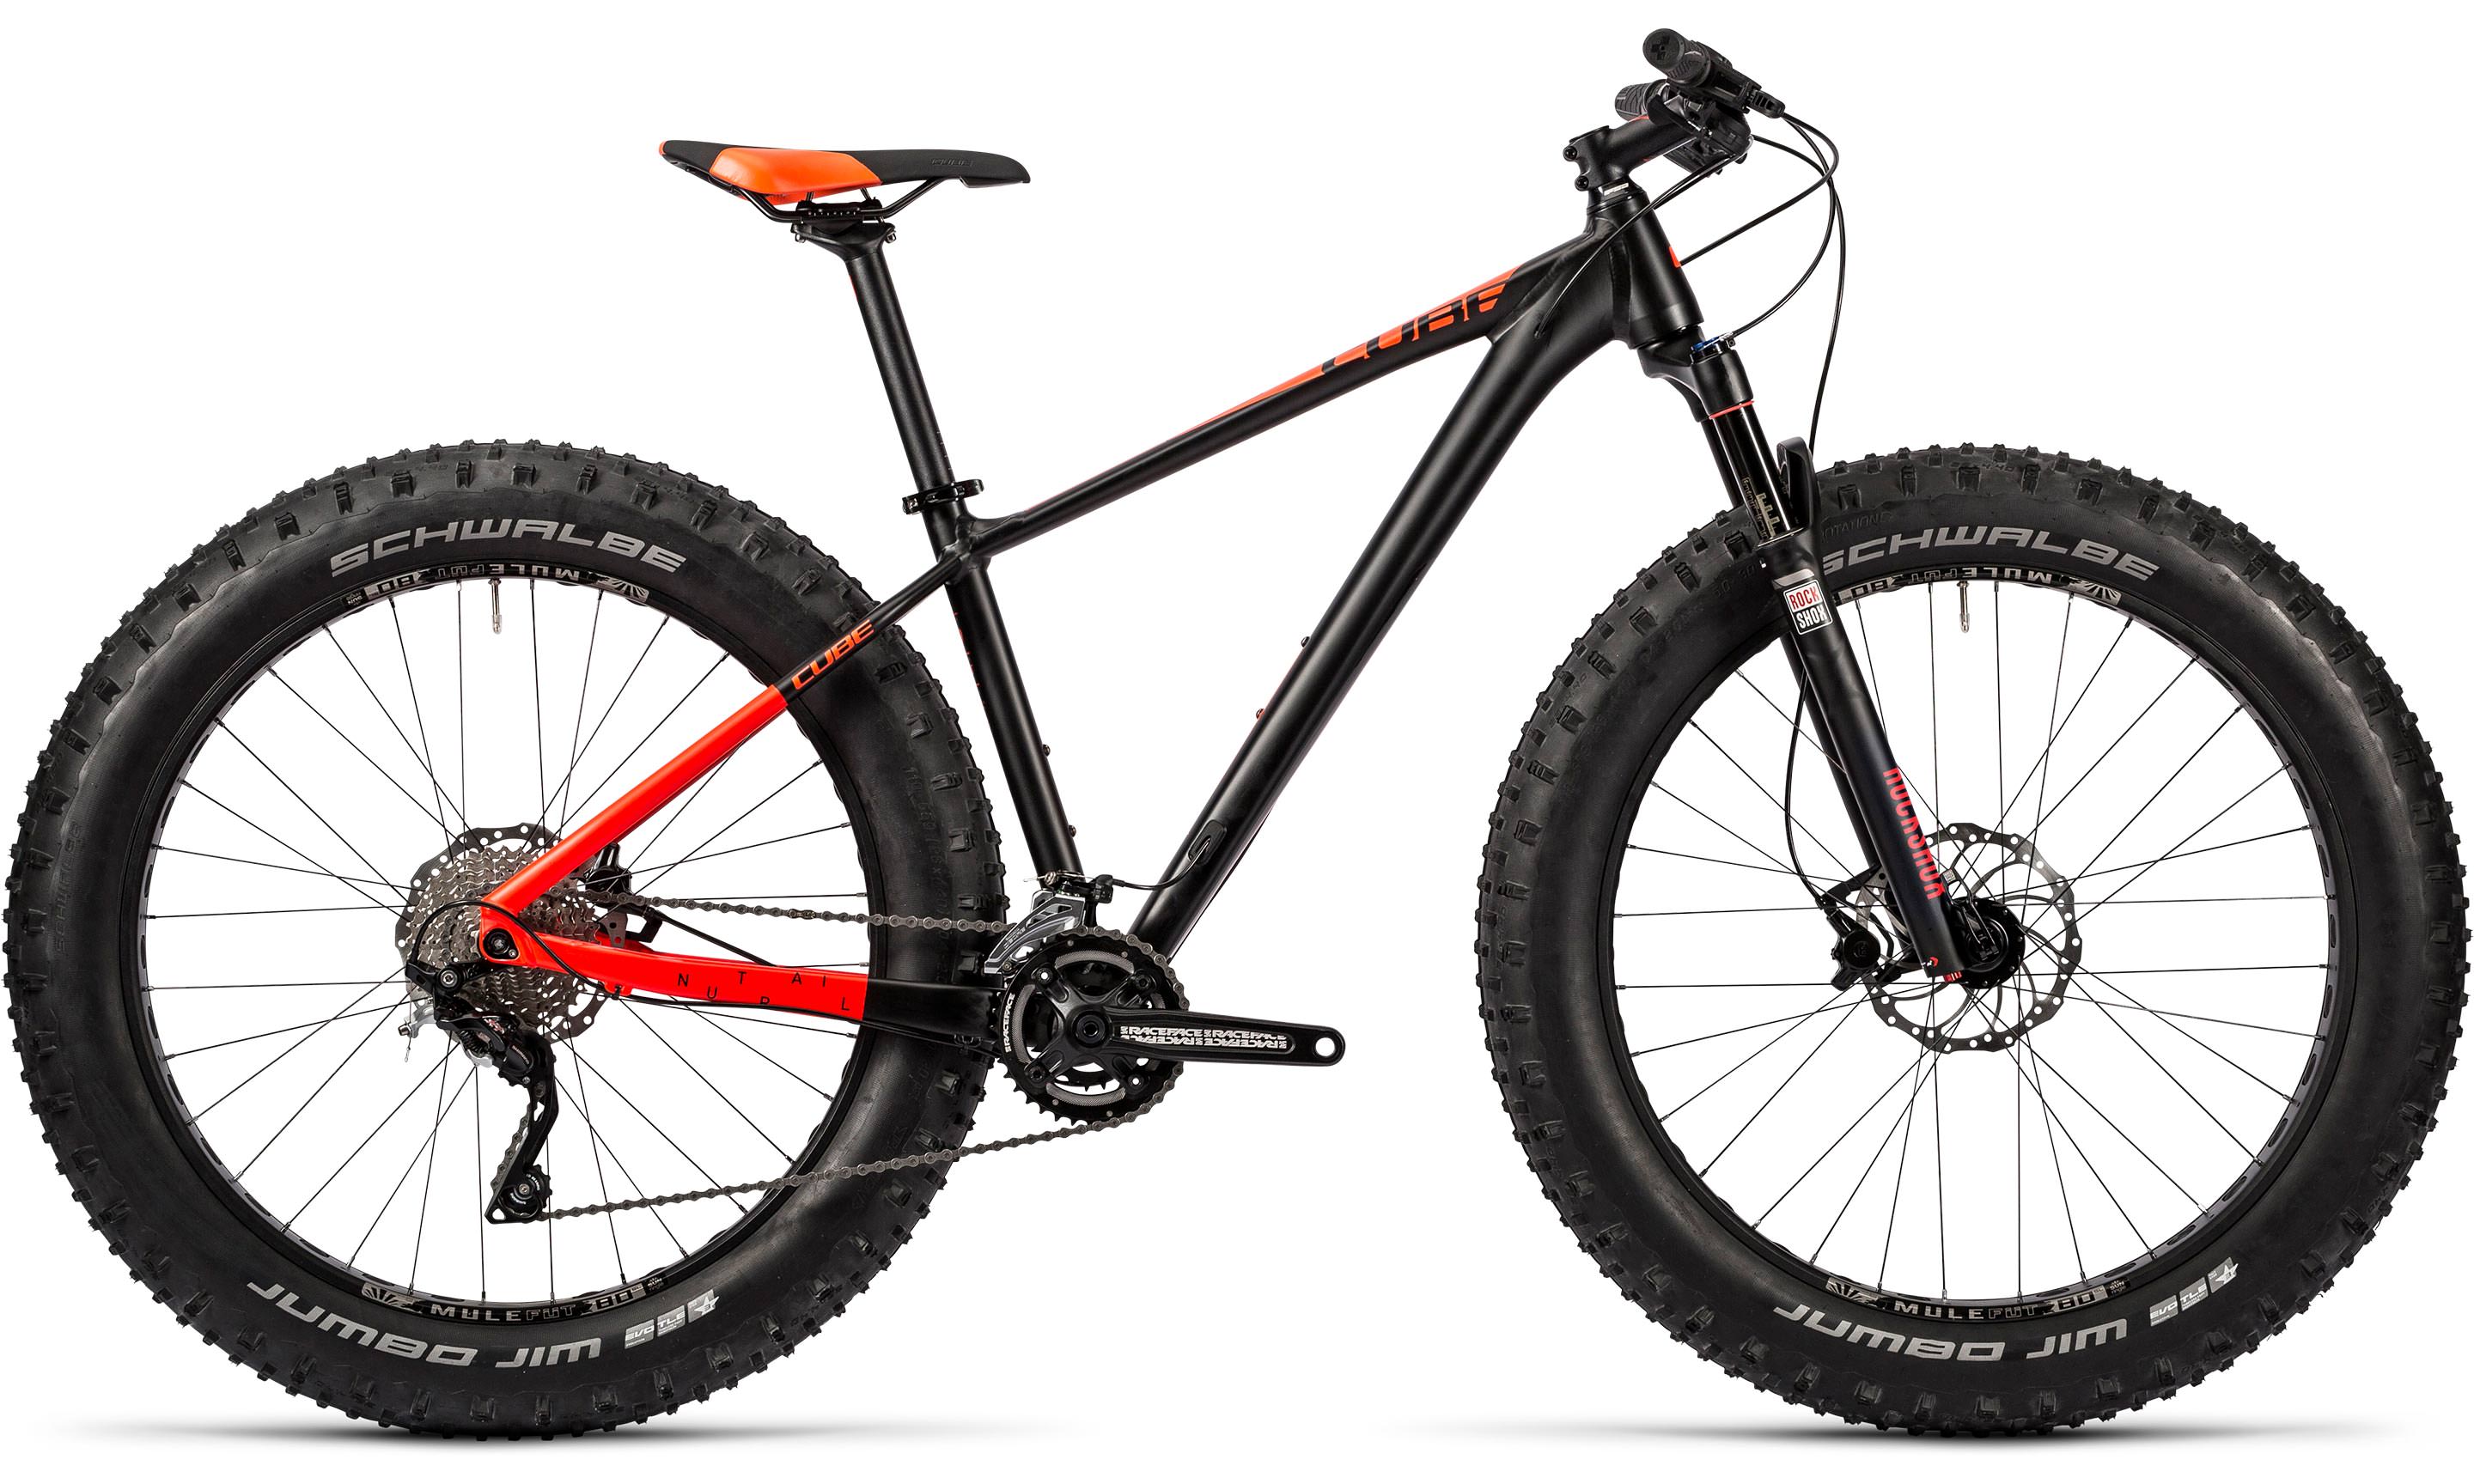 Nutrail 29 2016 | Bouticycle